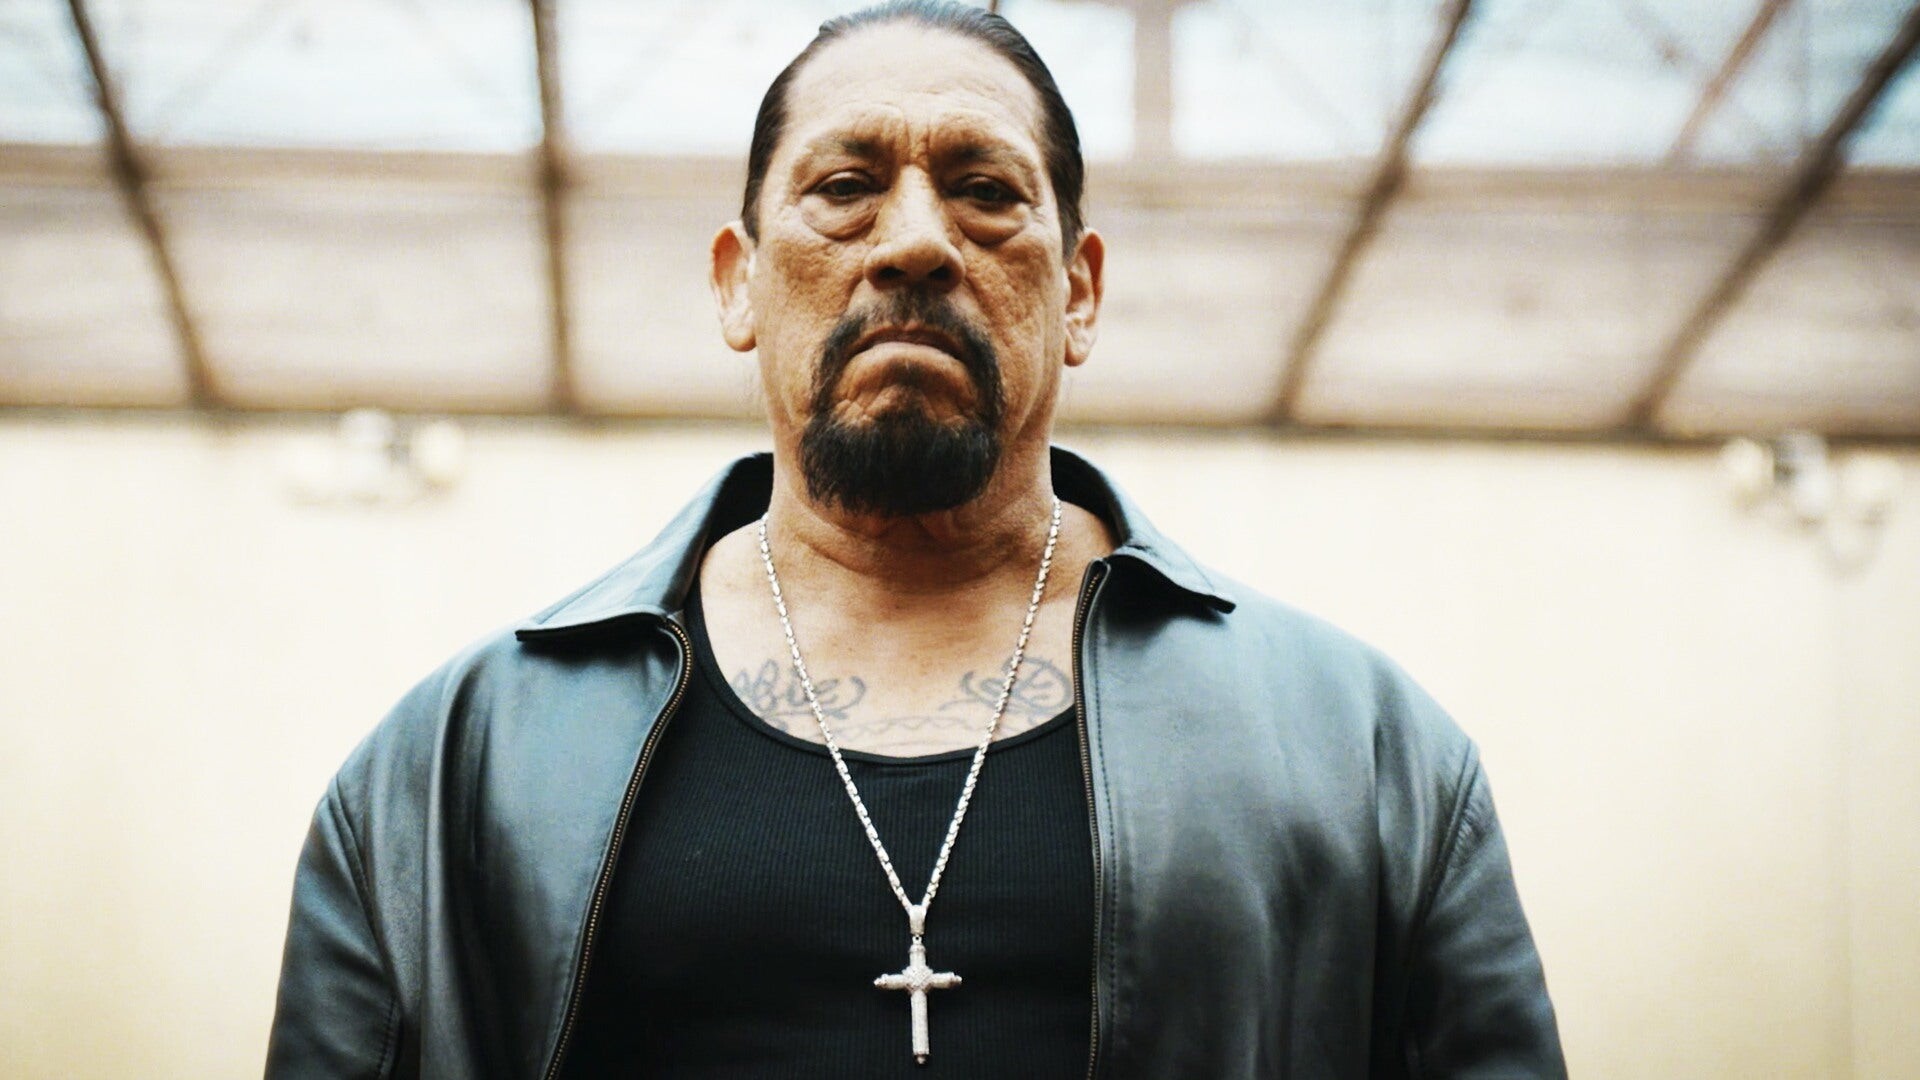 Danny Trejo: The most iconic performance, Portrayal of a deadly former Federale, Machete film series. 1920x1080 Full HD Background.